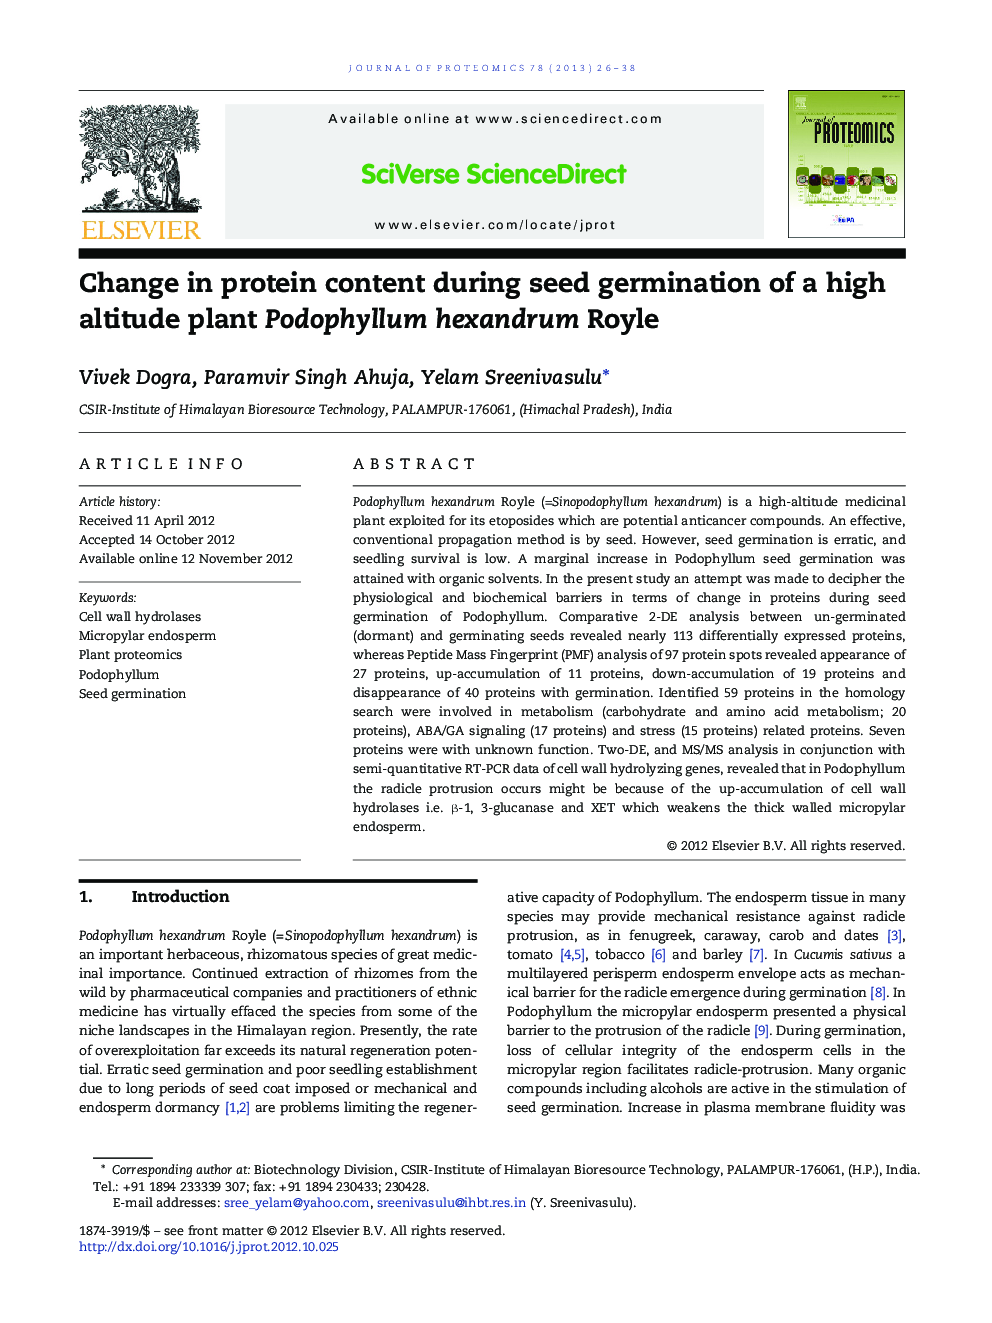 Change in protein content during seed germination of a high altitude plant Podophyllum hexandrum Royle